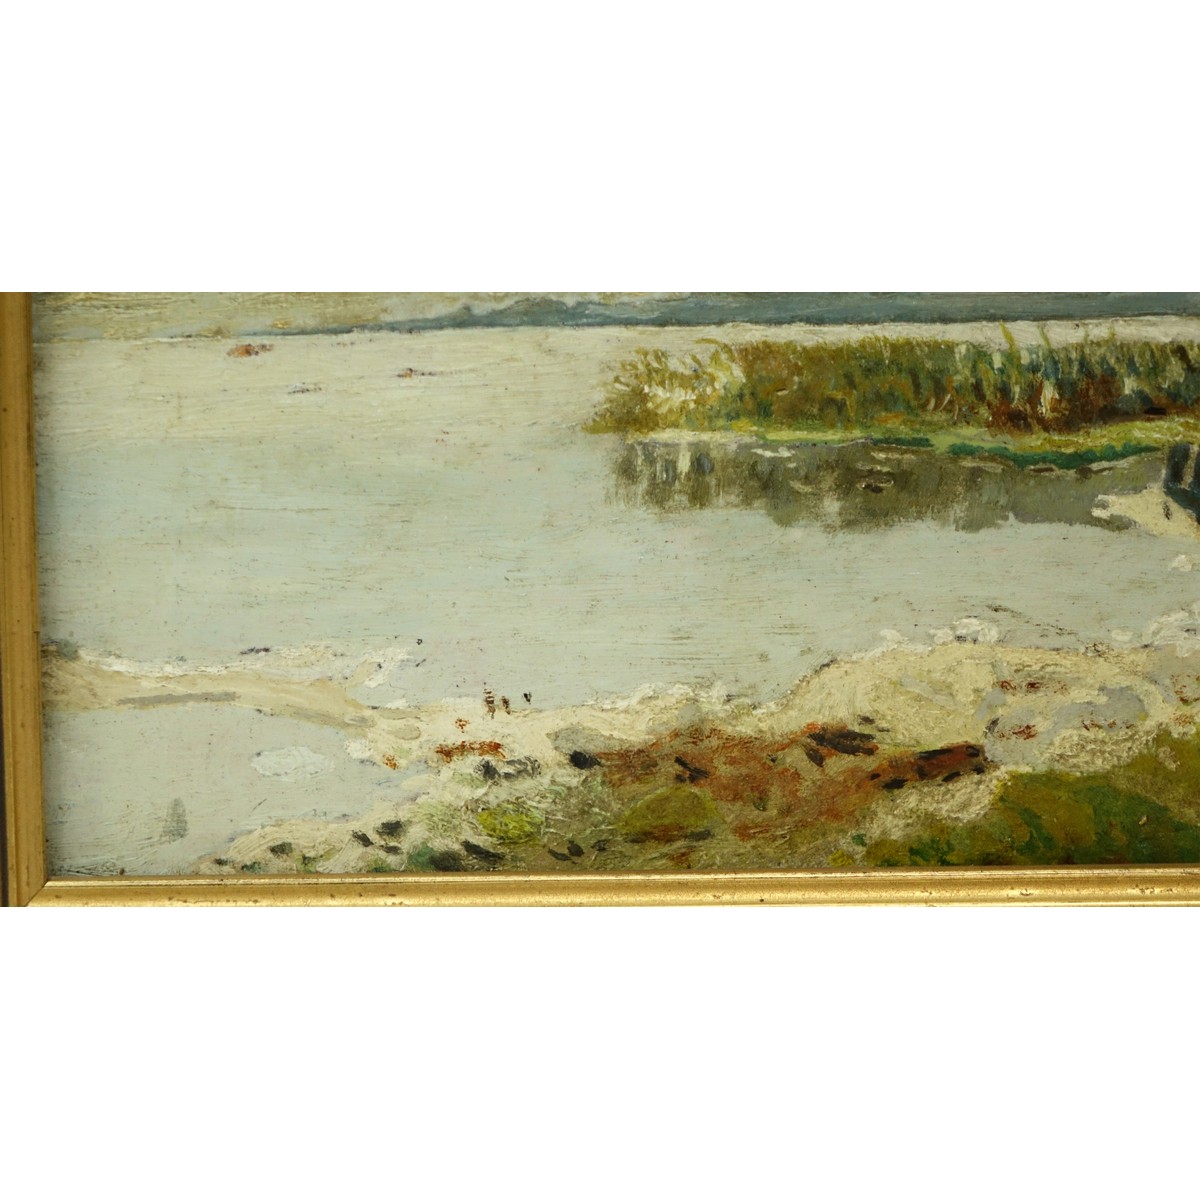 In The Style Of Charles Francois Daubigny, French (1817 - 1878). Oil painting on board "Waterside".